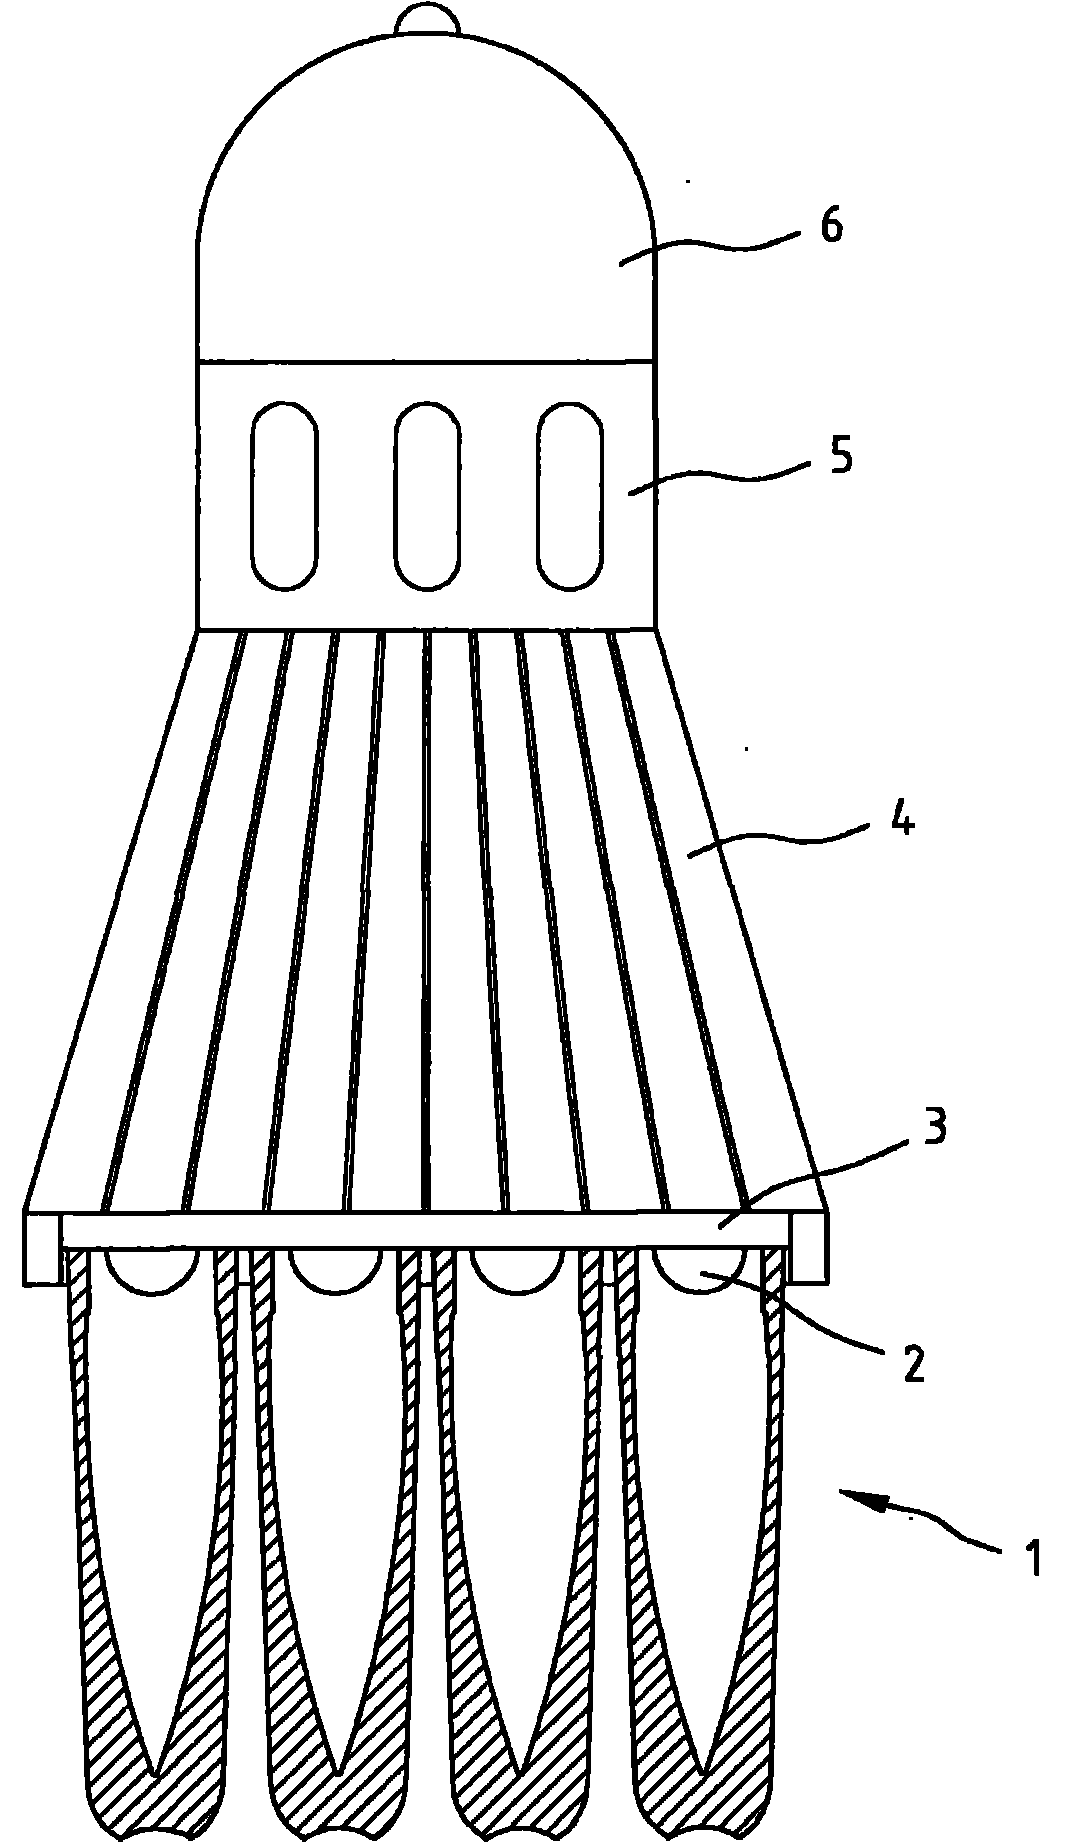 Device for eliminating overlapping shadow or track shadow of point light source